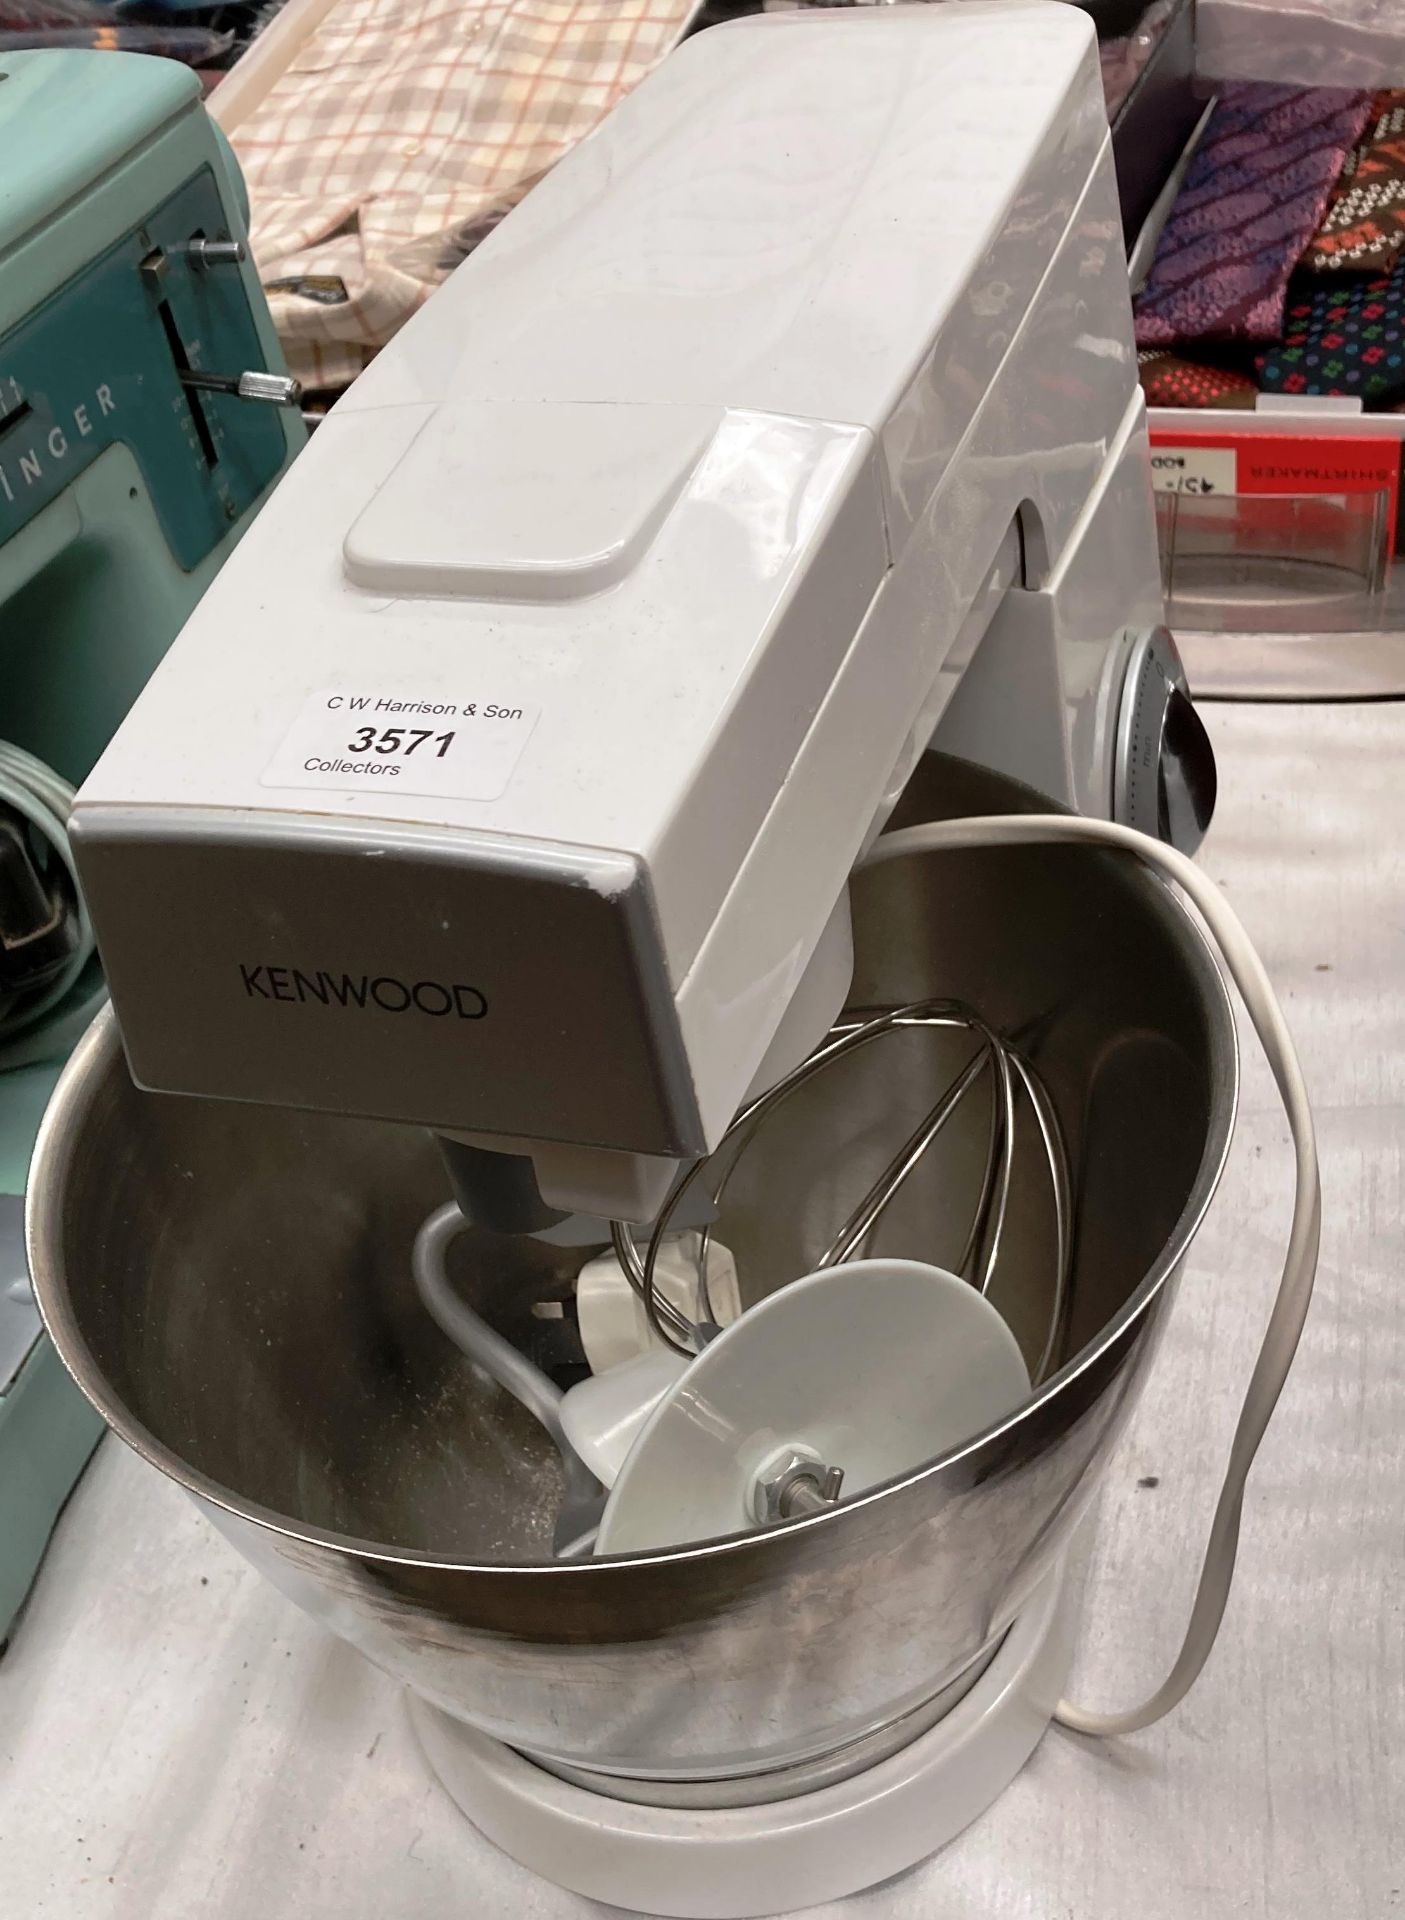 A Kenwood Chef KM300 domestic table top mixer complete with bowl.